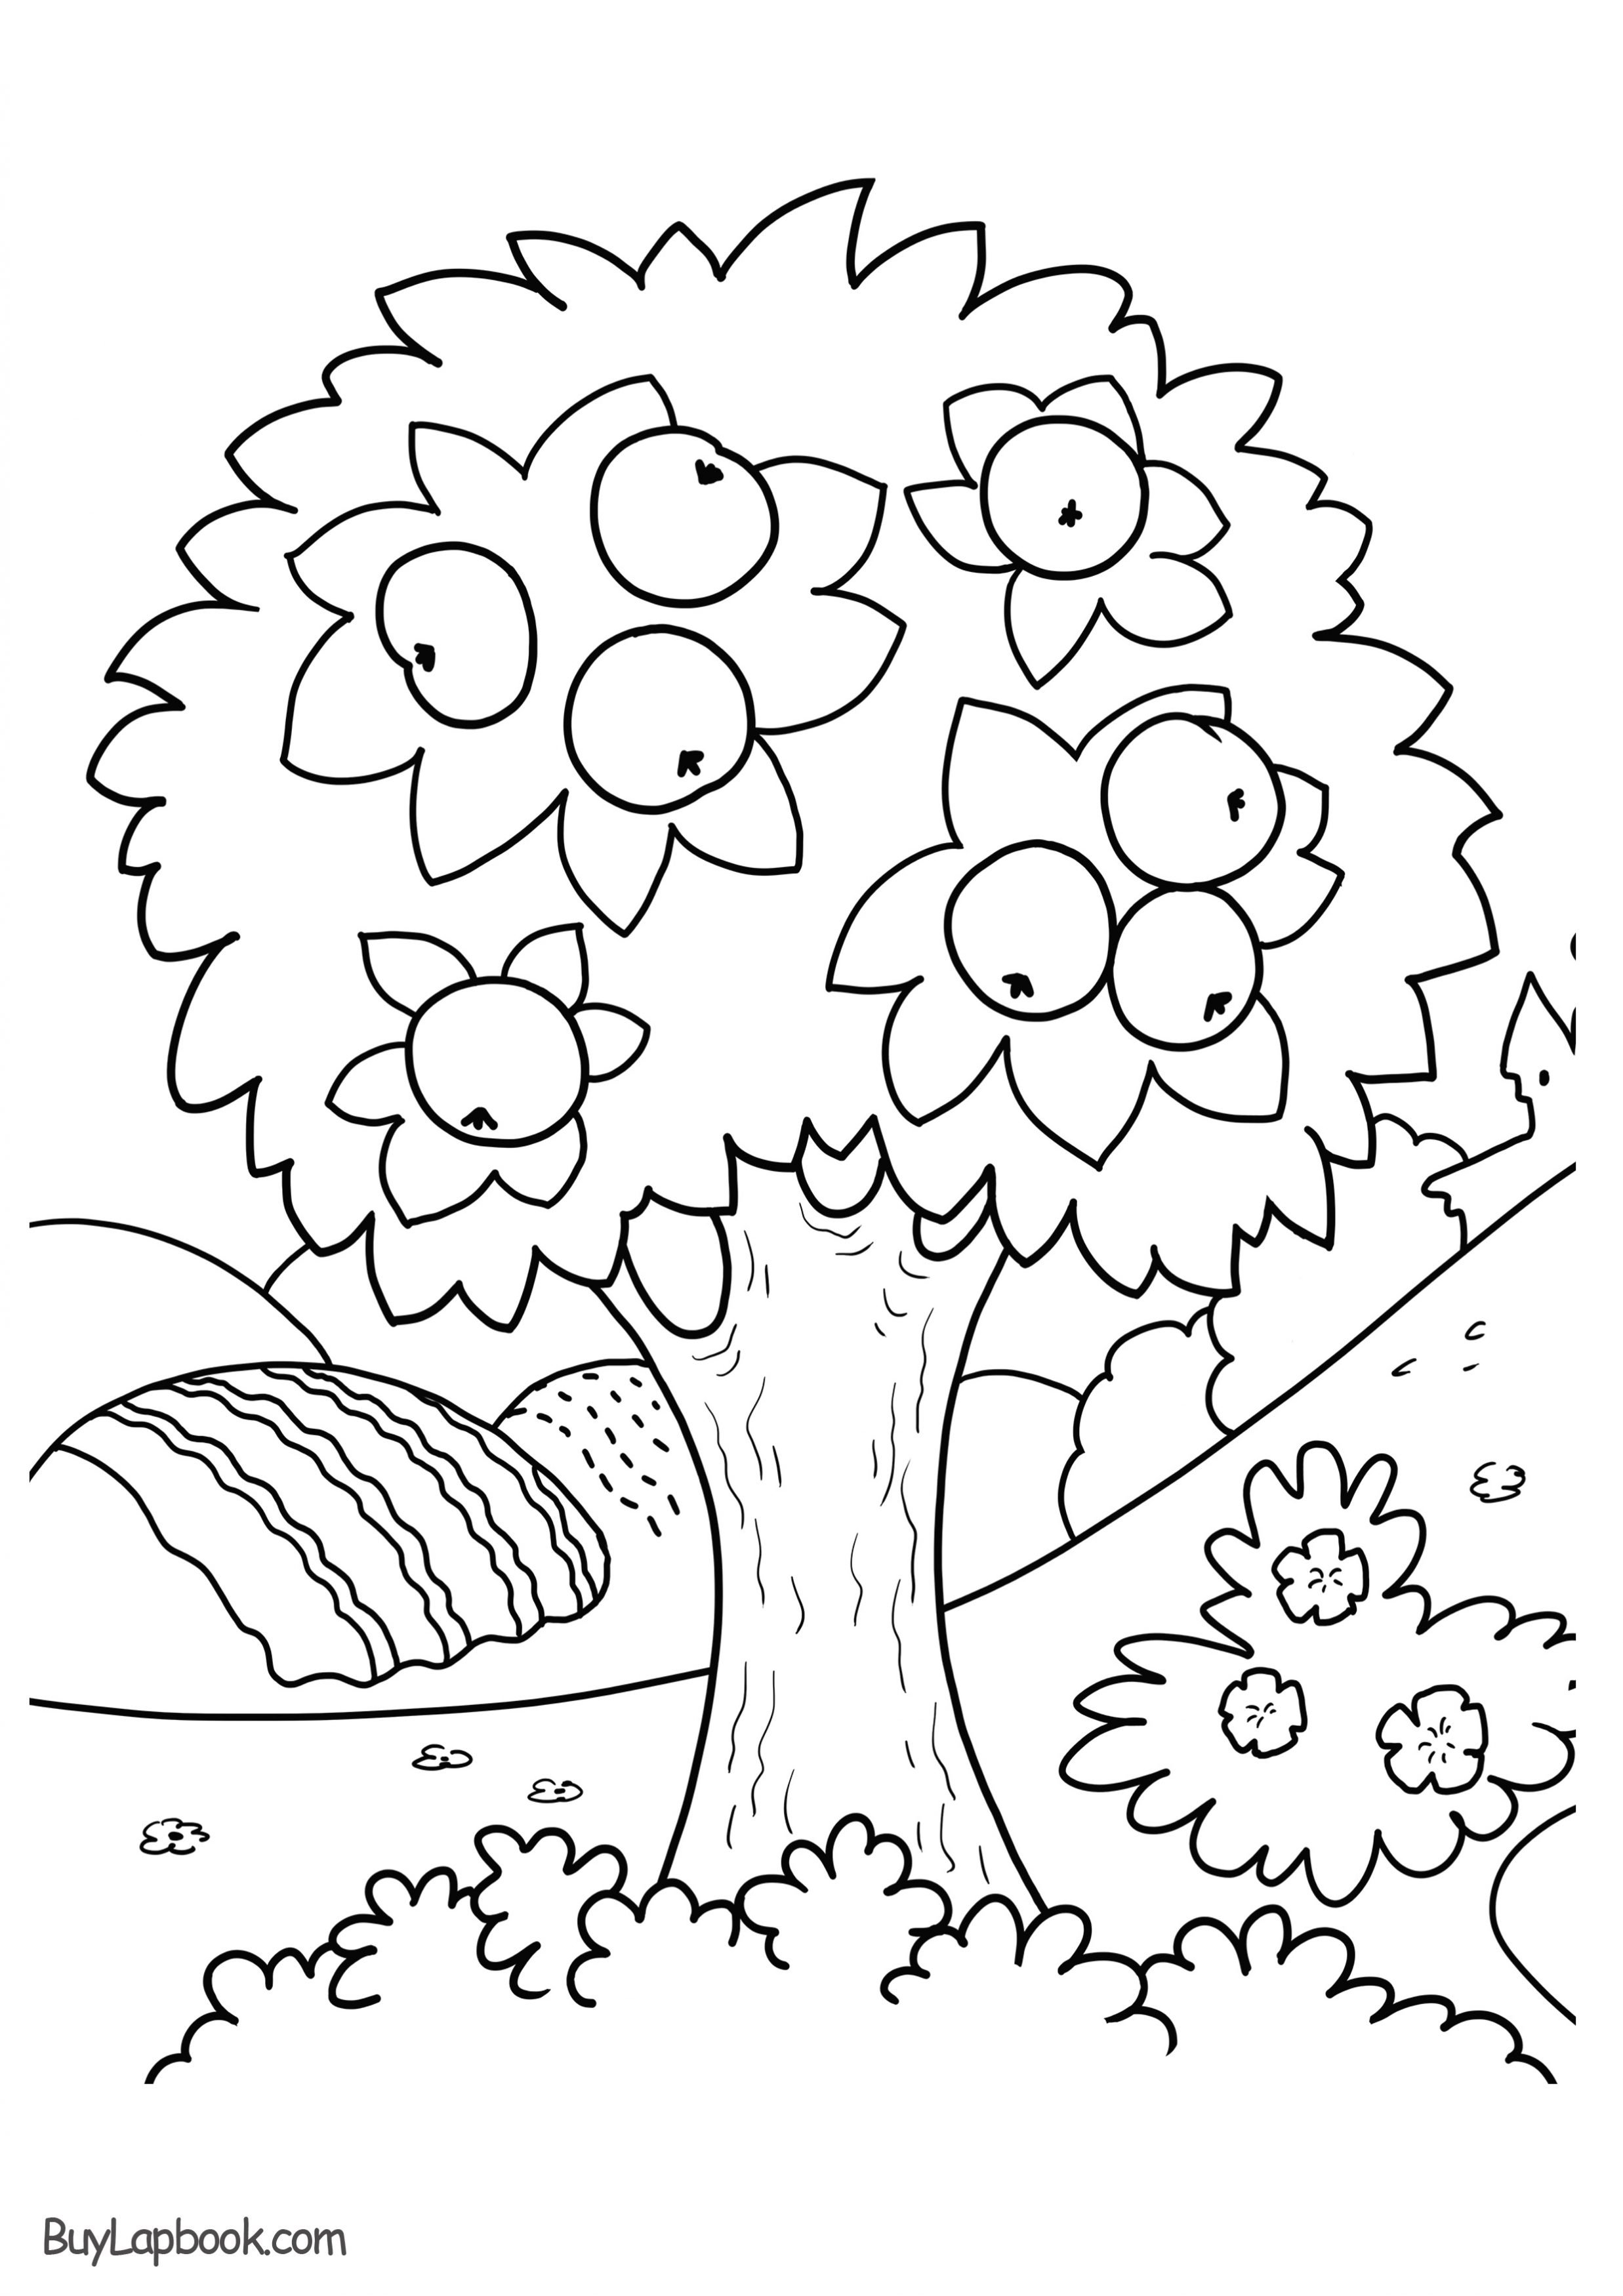 Coloring cute tree for children 5-6 years old